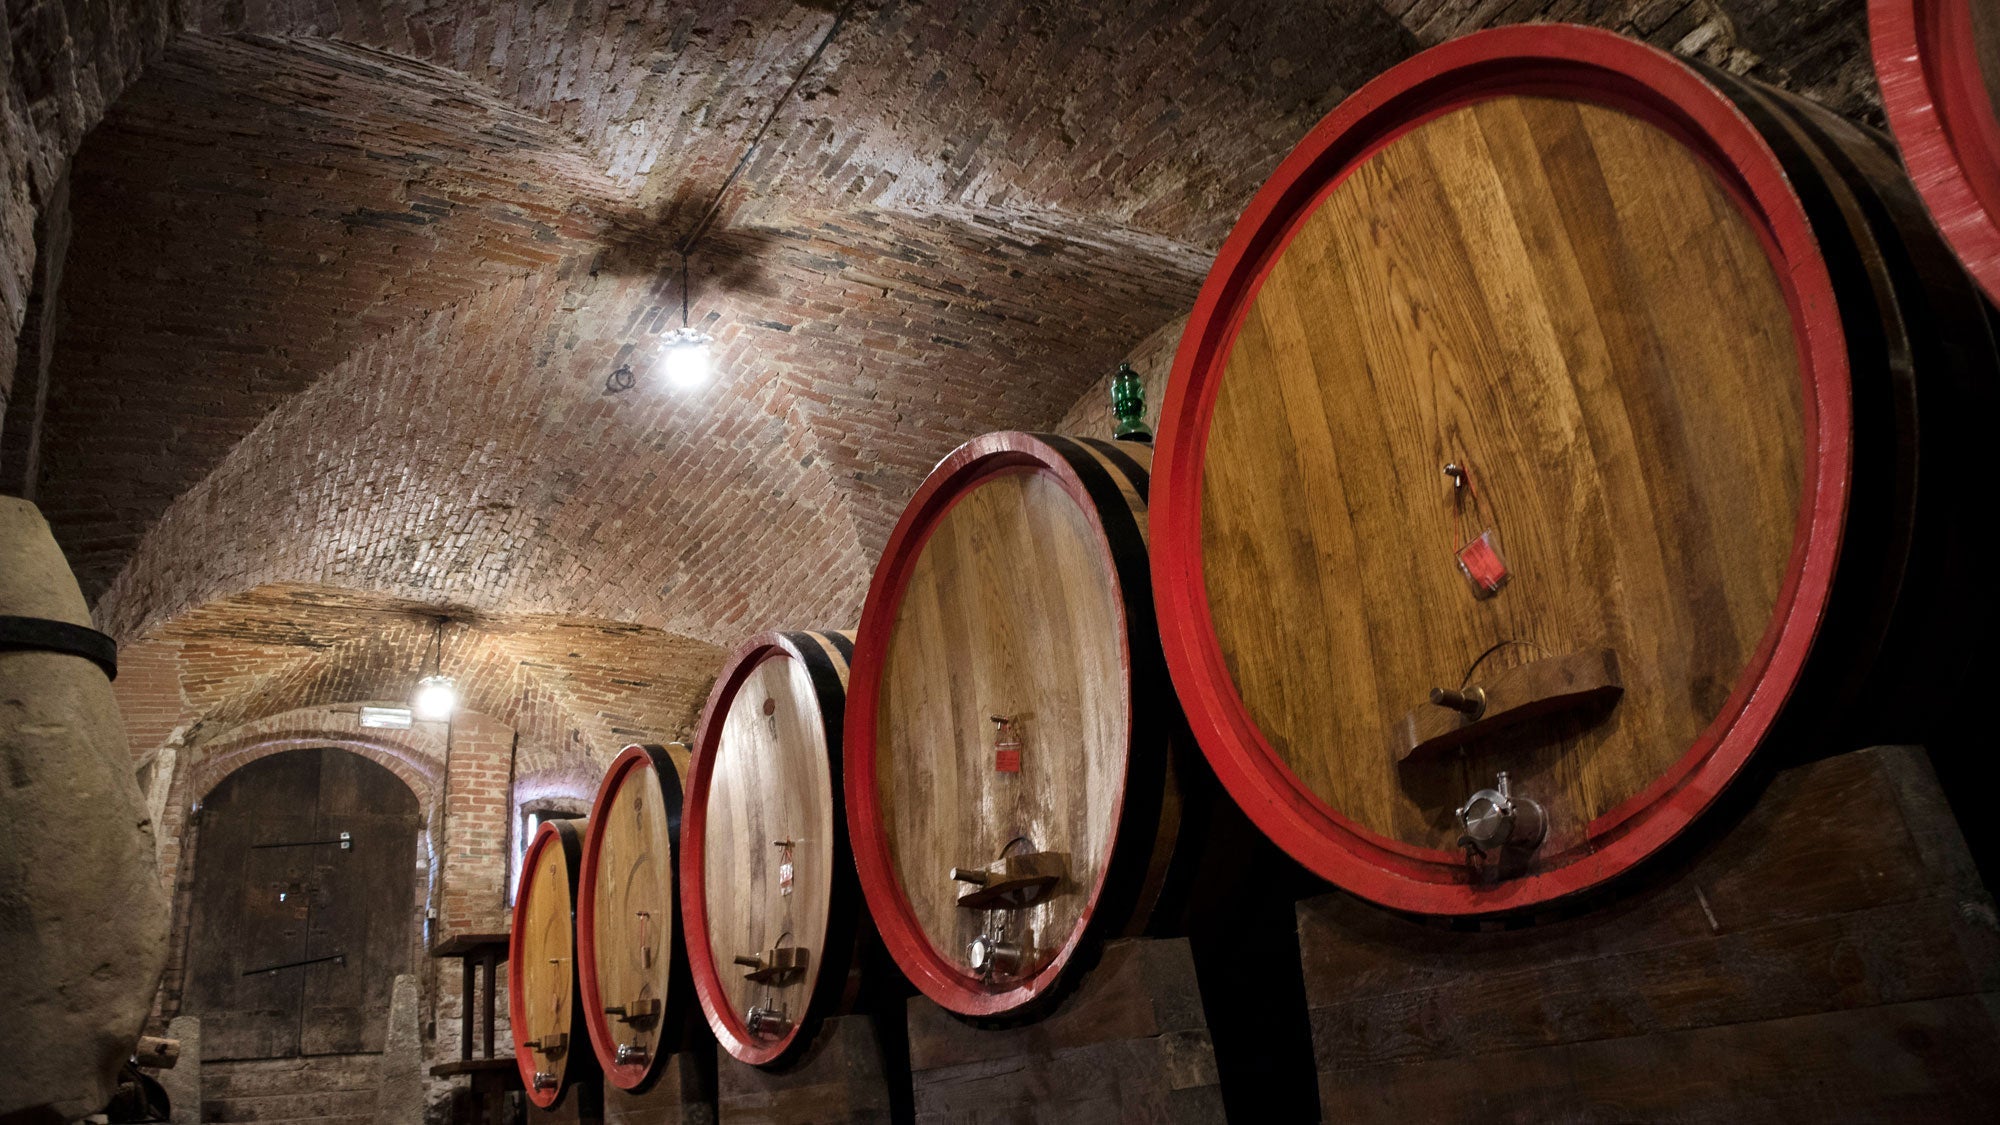 Wooden barrels in the cellar of a winery